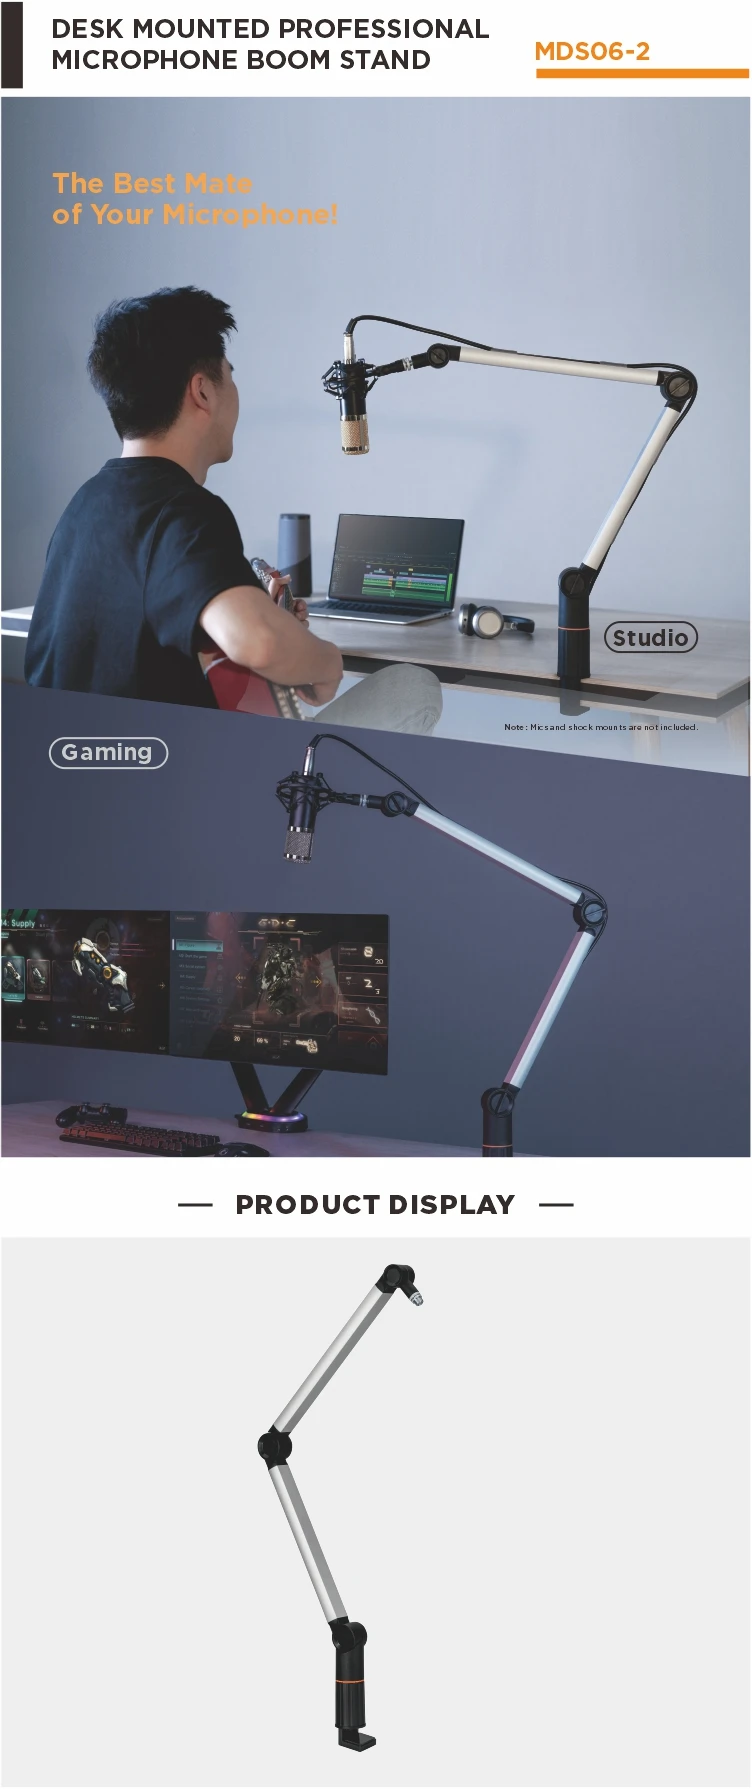 Desk-Mounted Professional Microphone Mount Stand for Gaming or Studio